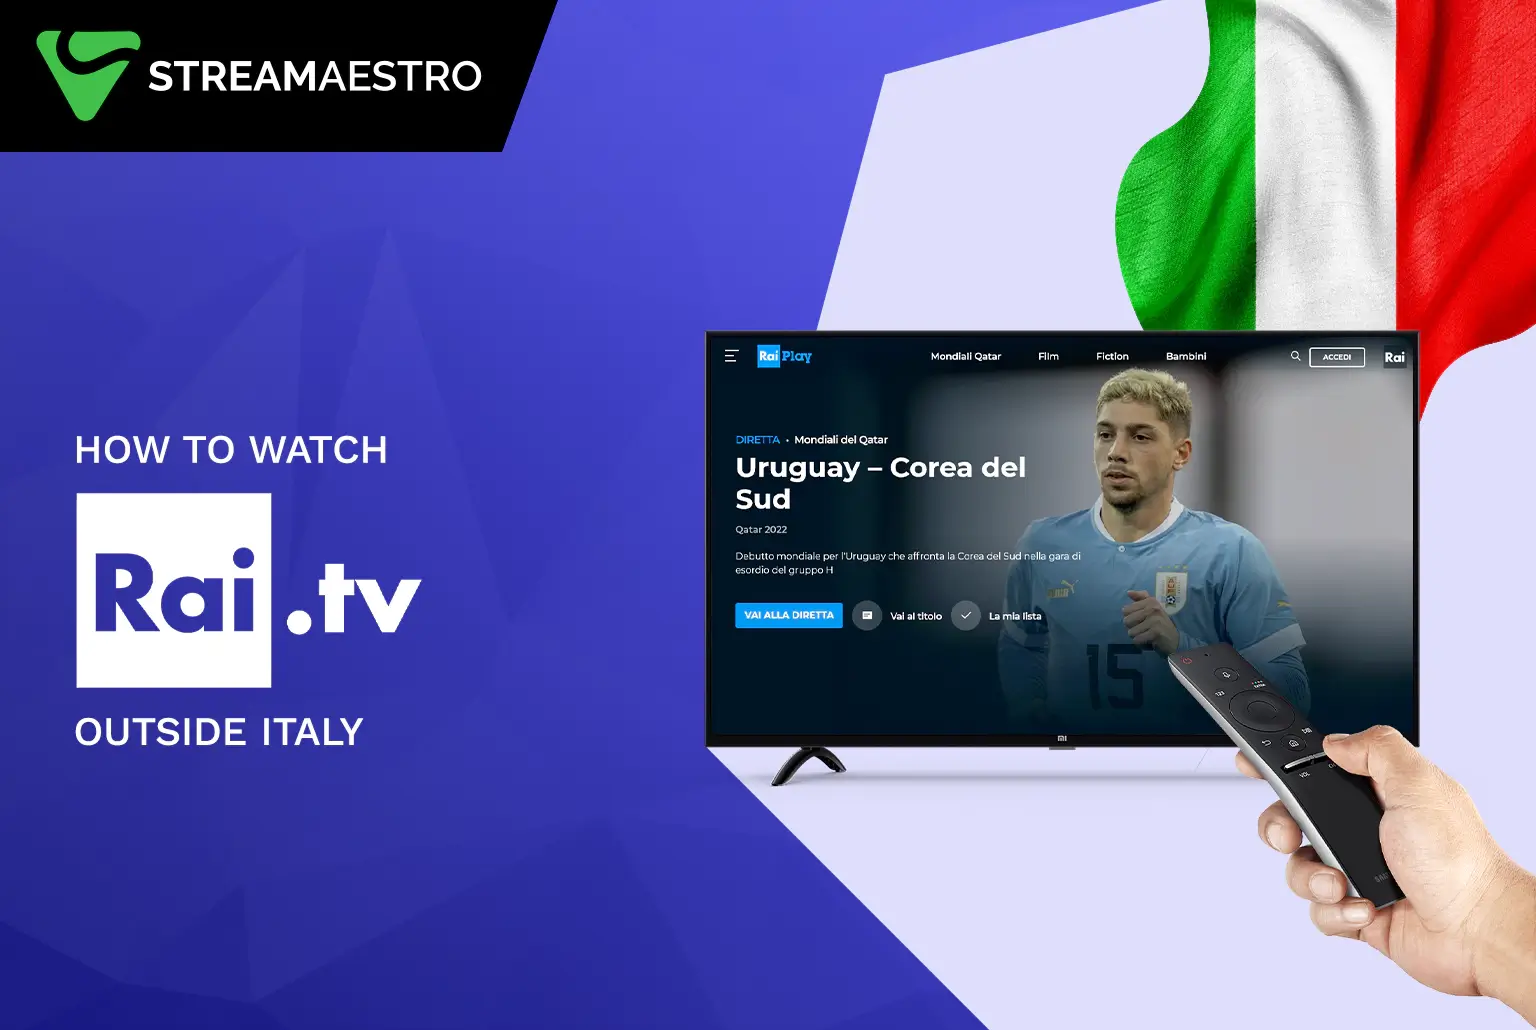 How to Watch Rai TV outside Italy with the VPN [Updated Feb 2023]